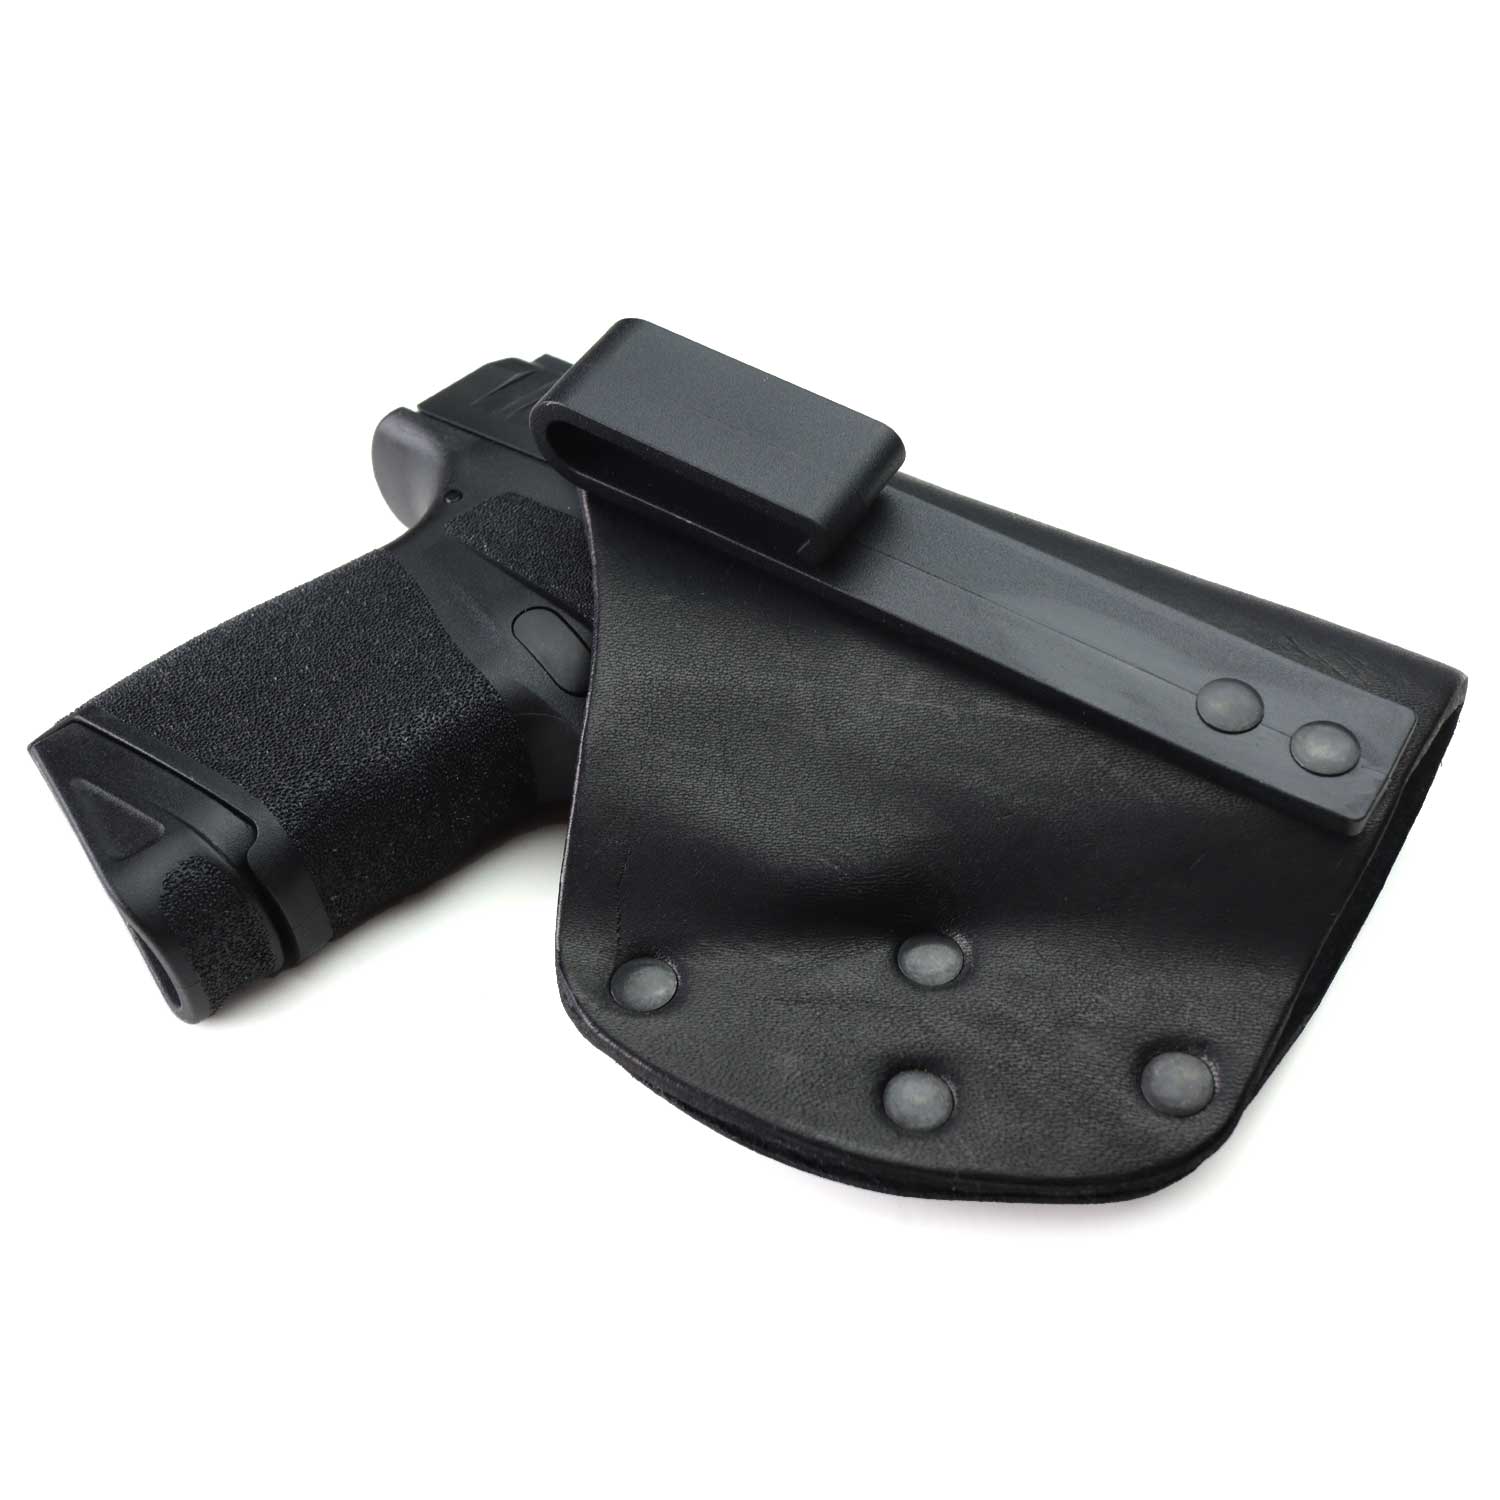 FoxX Holsters Leather & Kydex IWB Hybrid Holster FNX 9/40 Natural Right Tuckable 